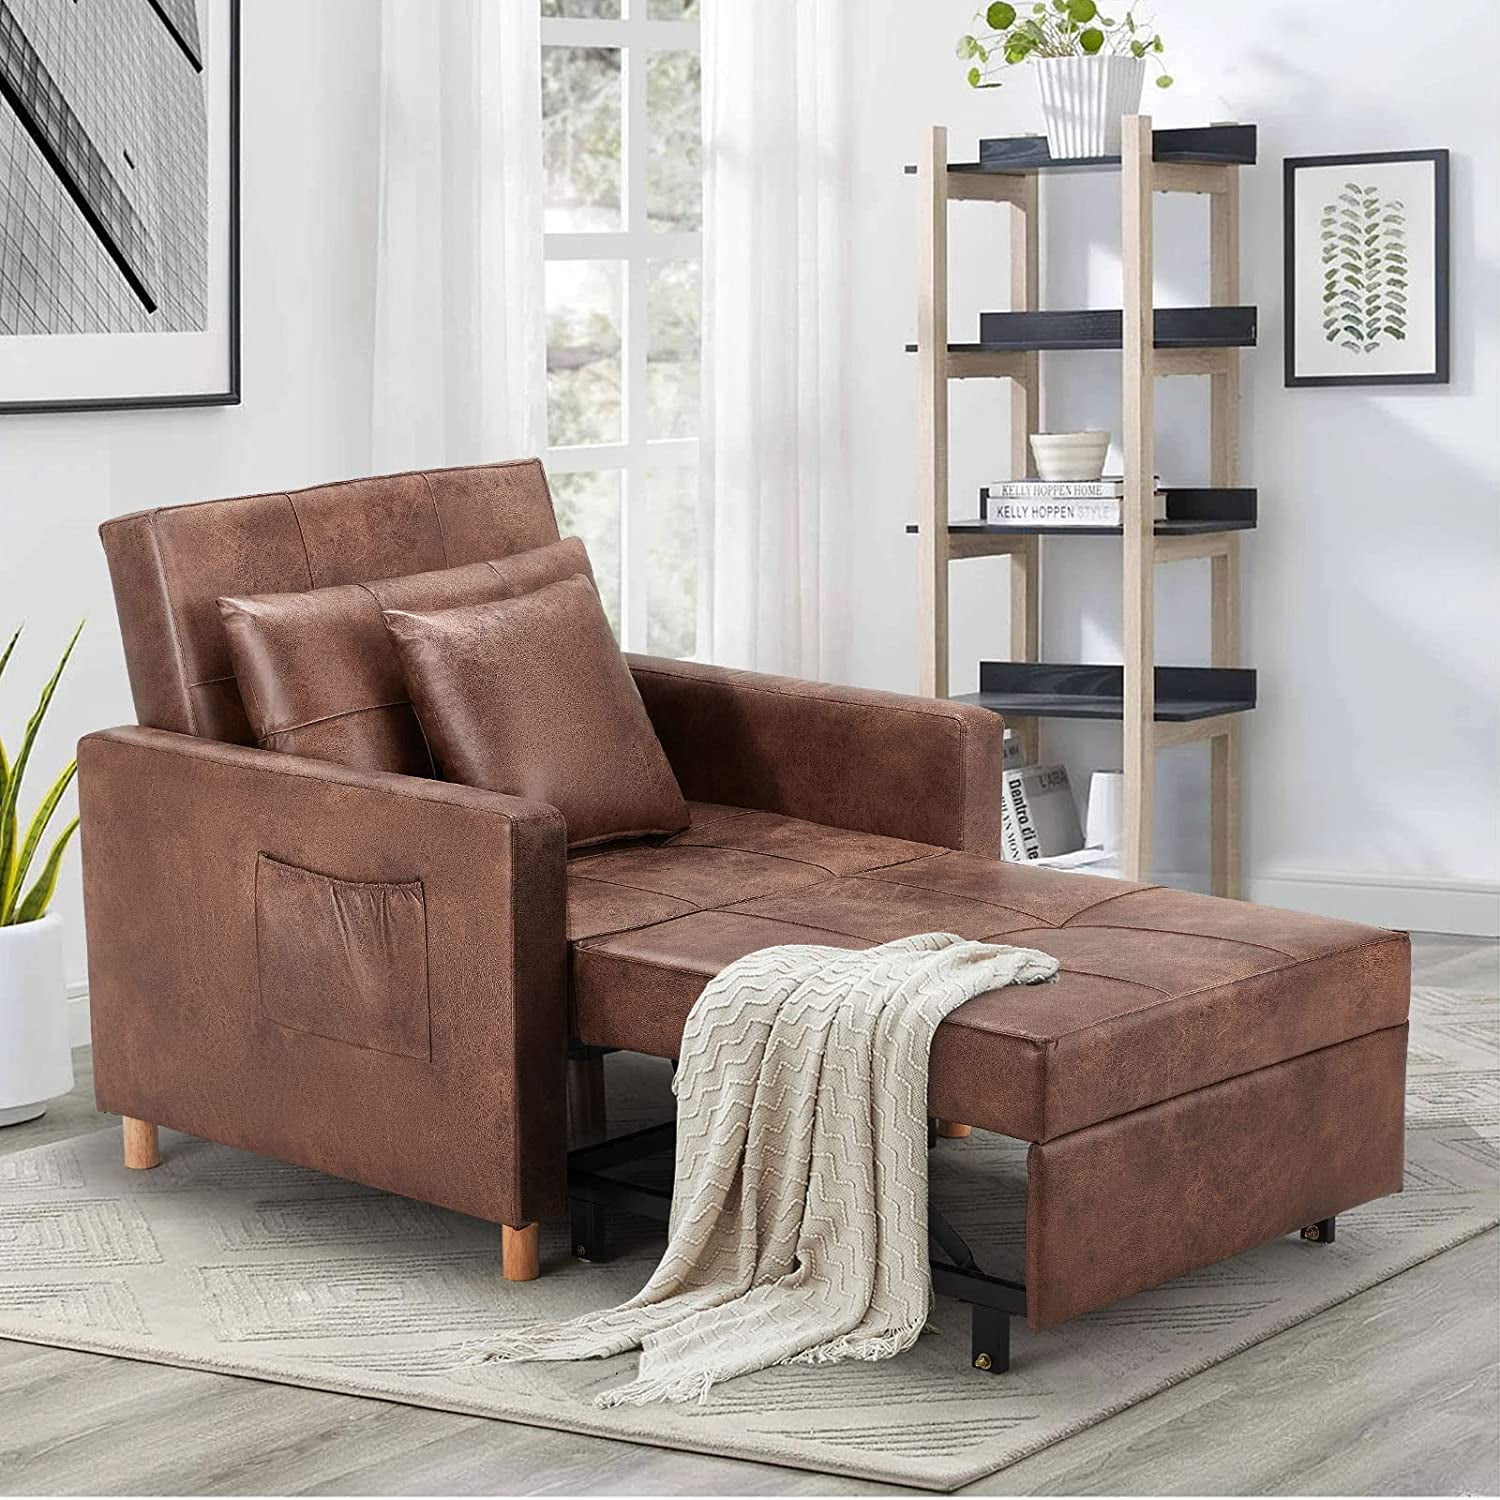 Axis Symmetry Study Buddy Office Chair - Bed Bath & Beyond - 18705070